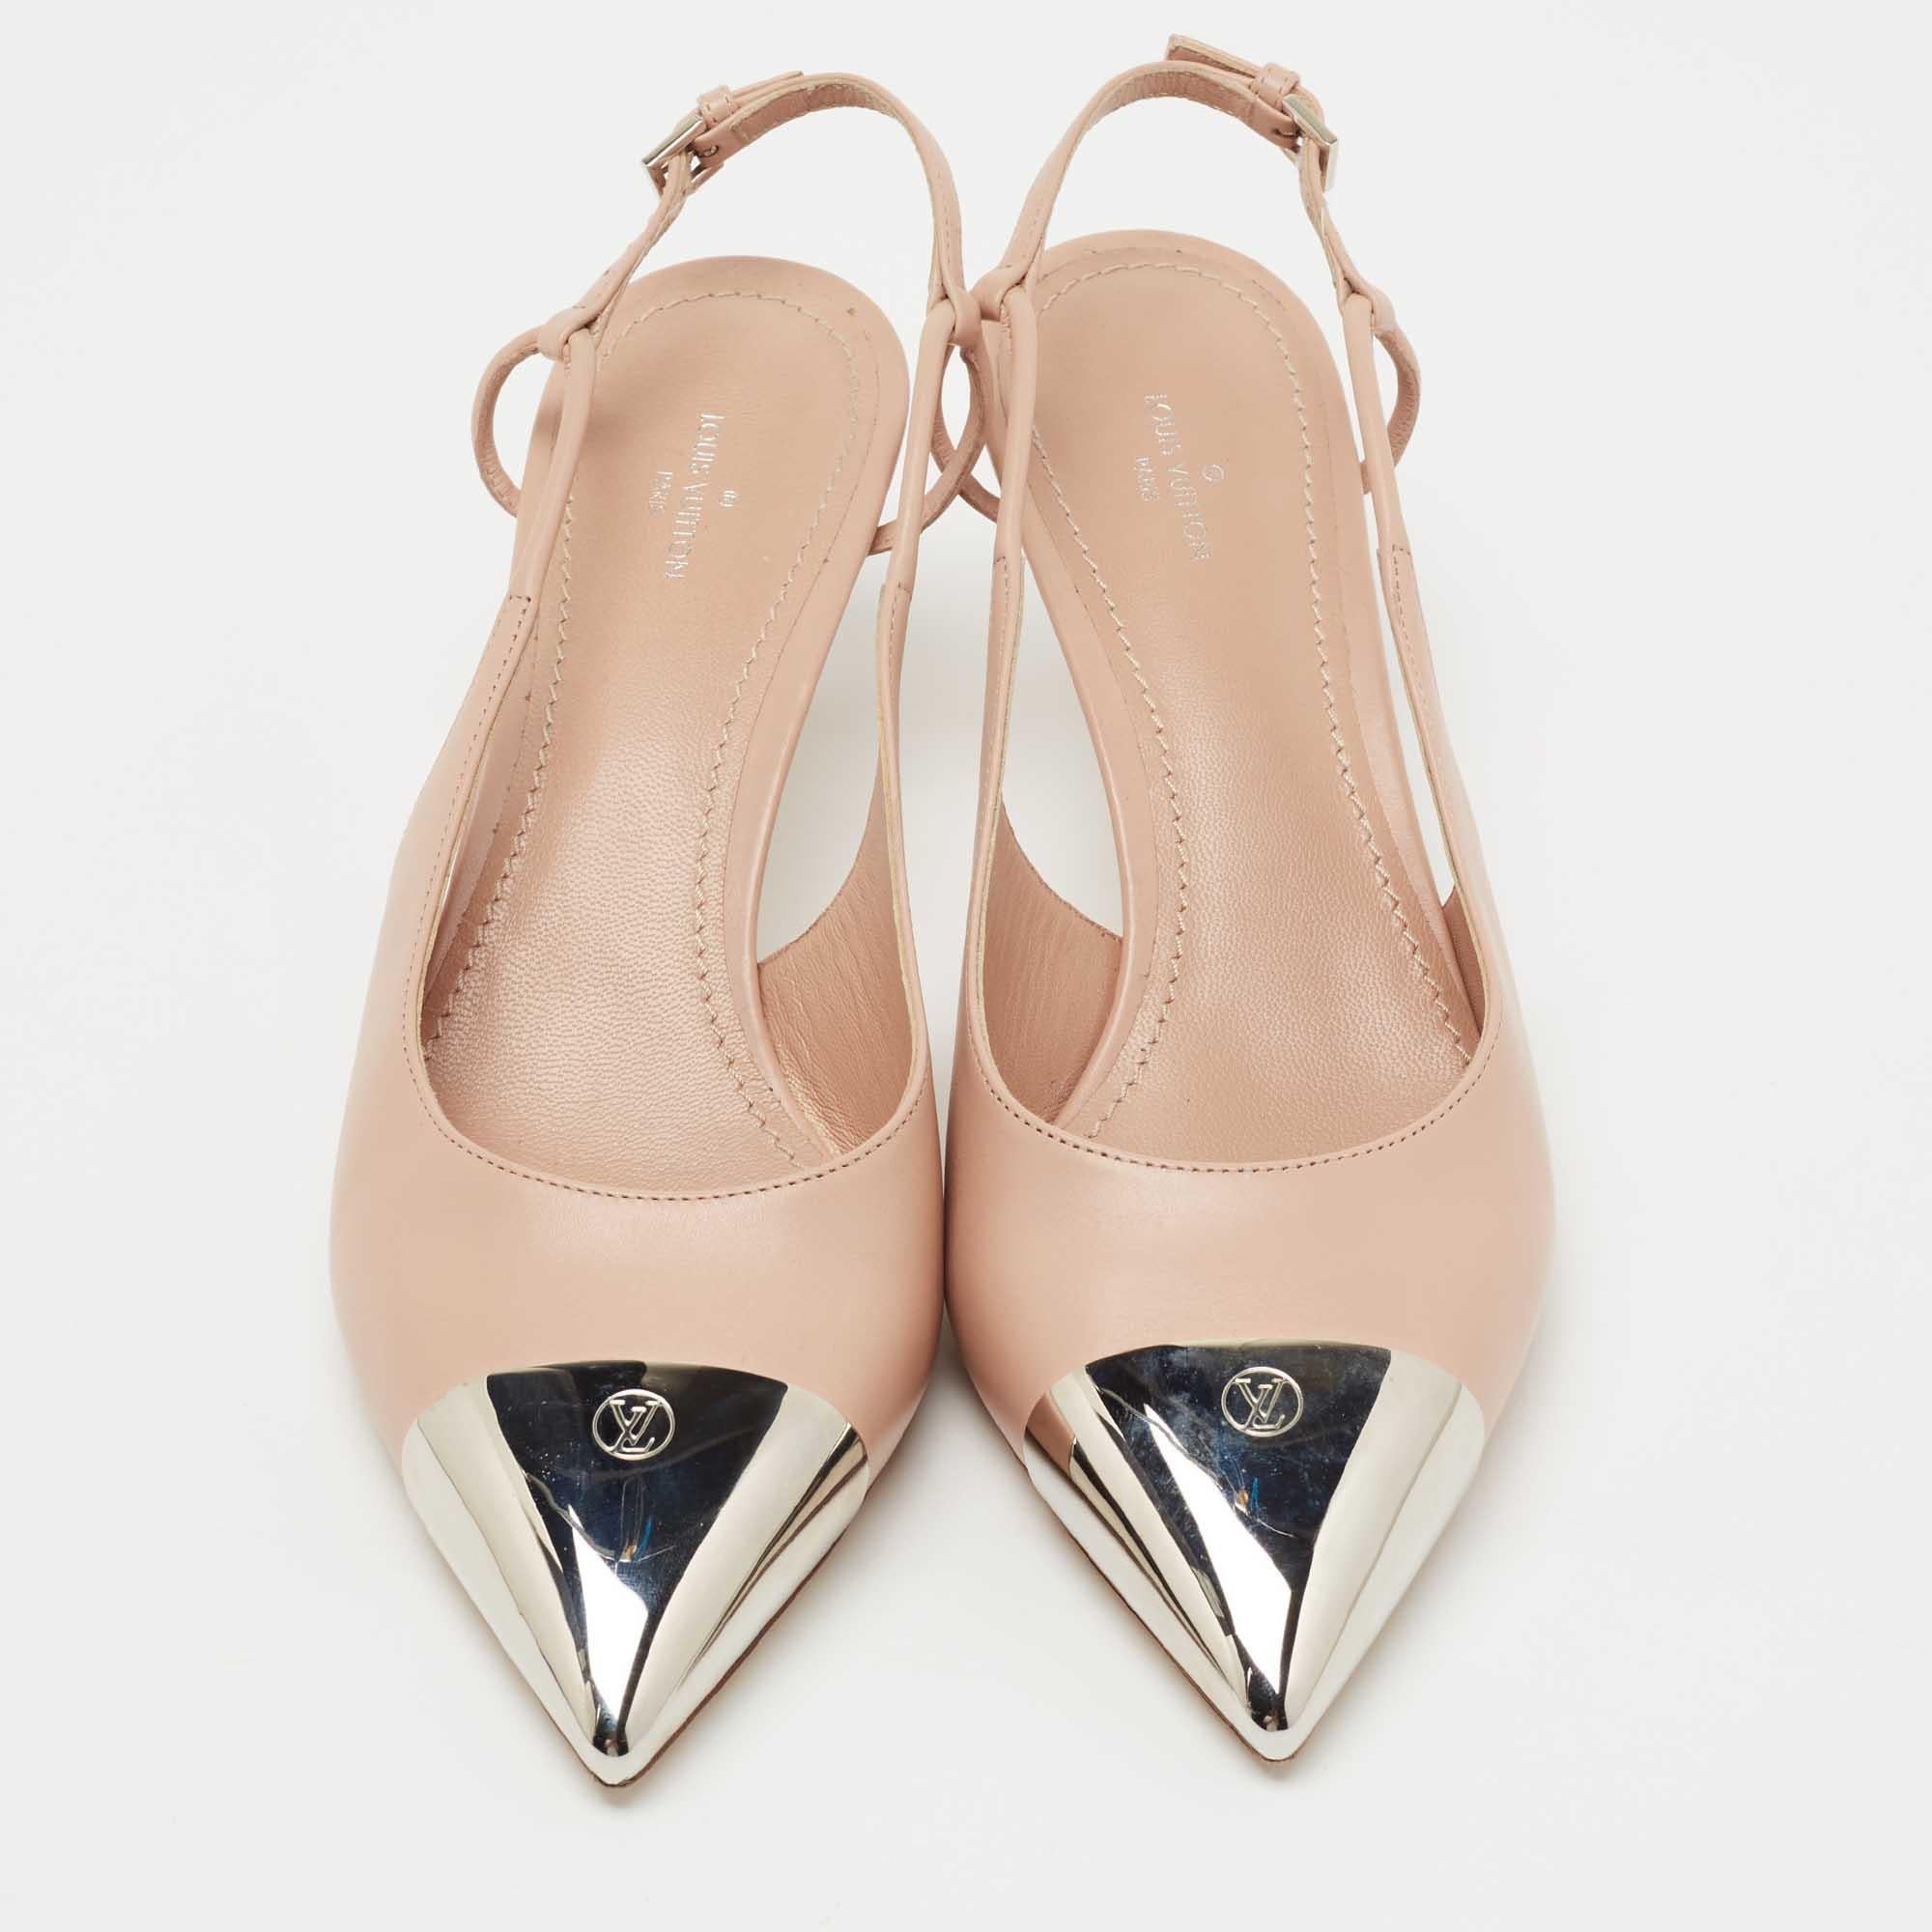 Louis Vuitton Slingback Pumps In Green Satin With White Flower Toe